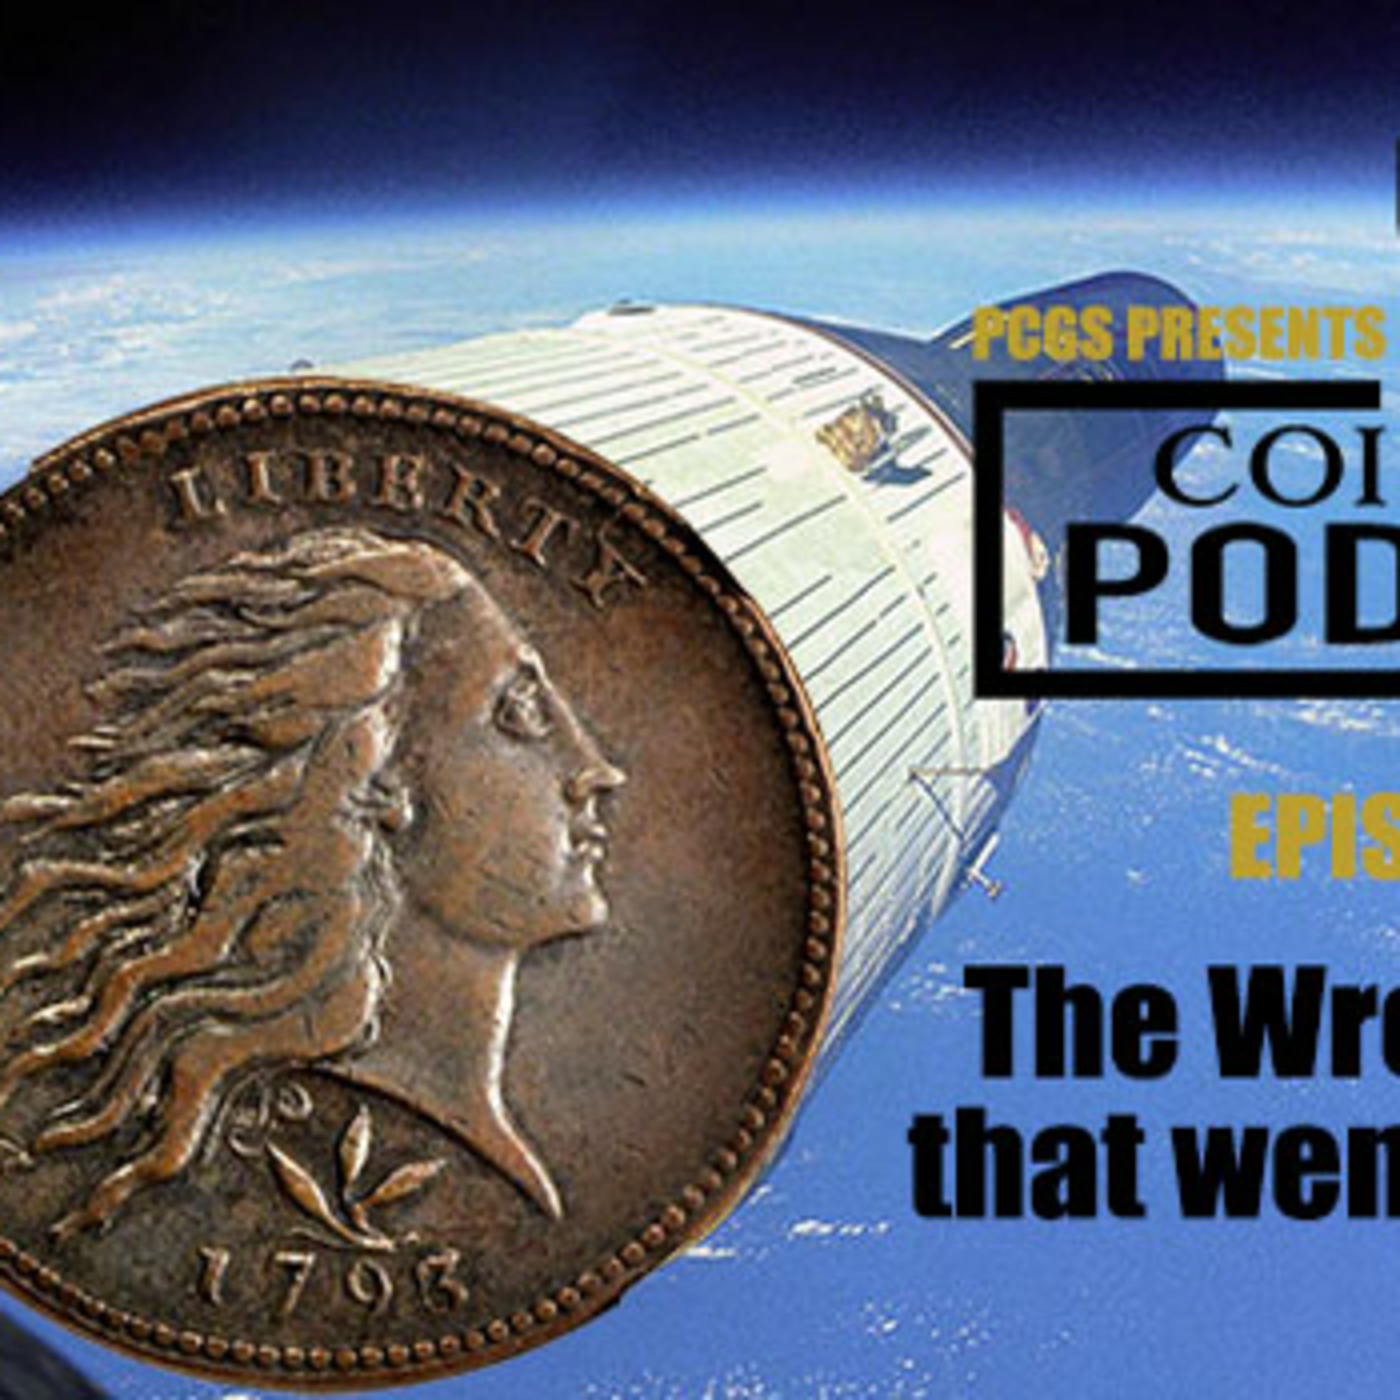 Episode 170: CoinWeek Podcast #170: The Wreath Cent that went to Space